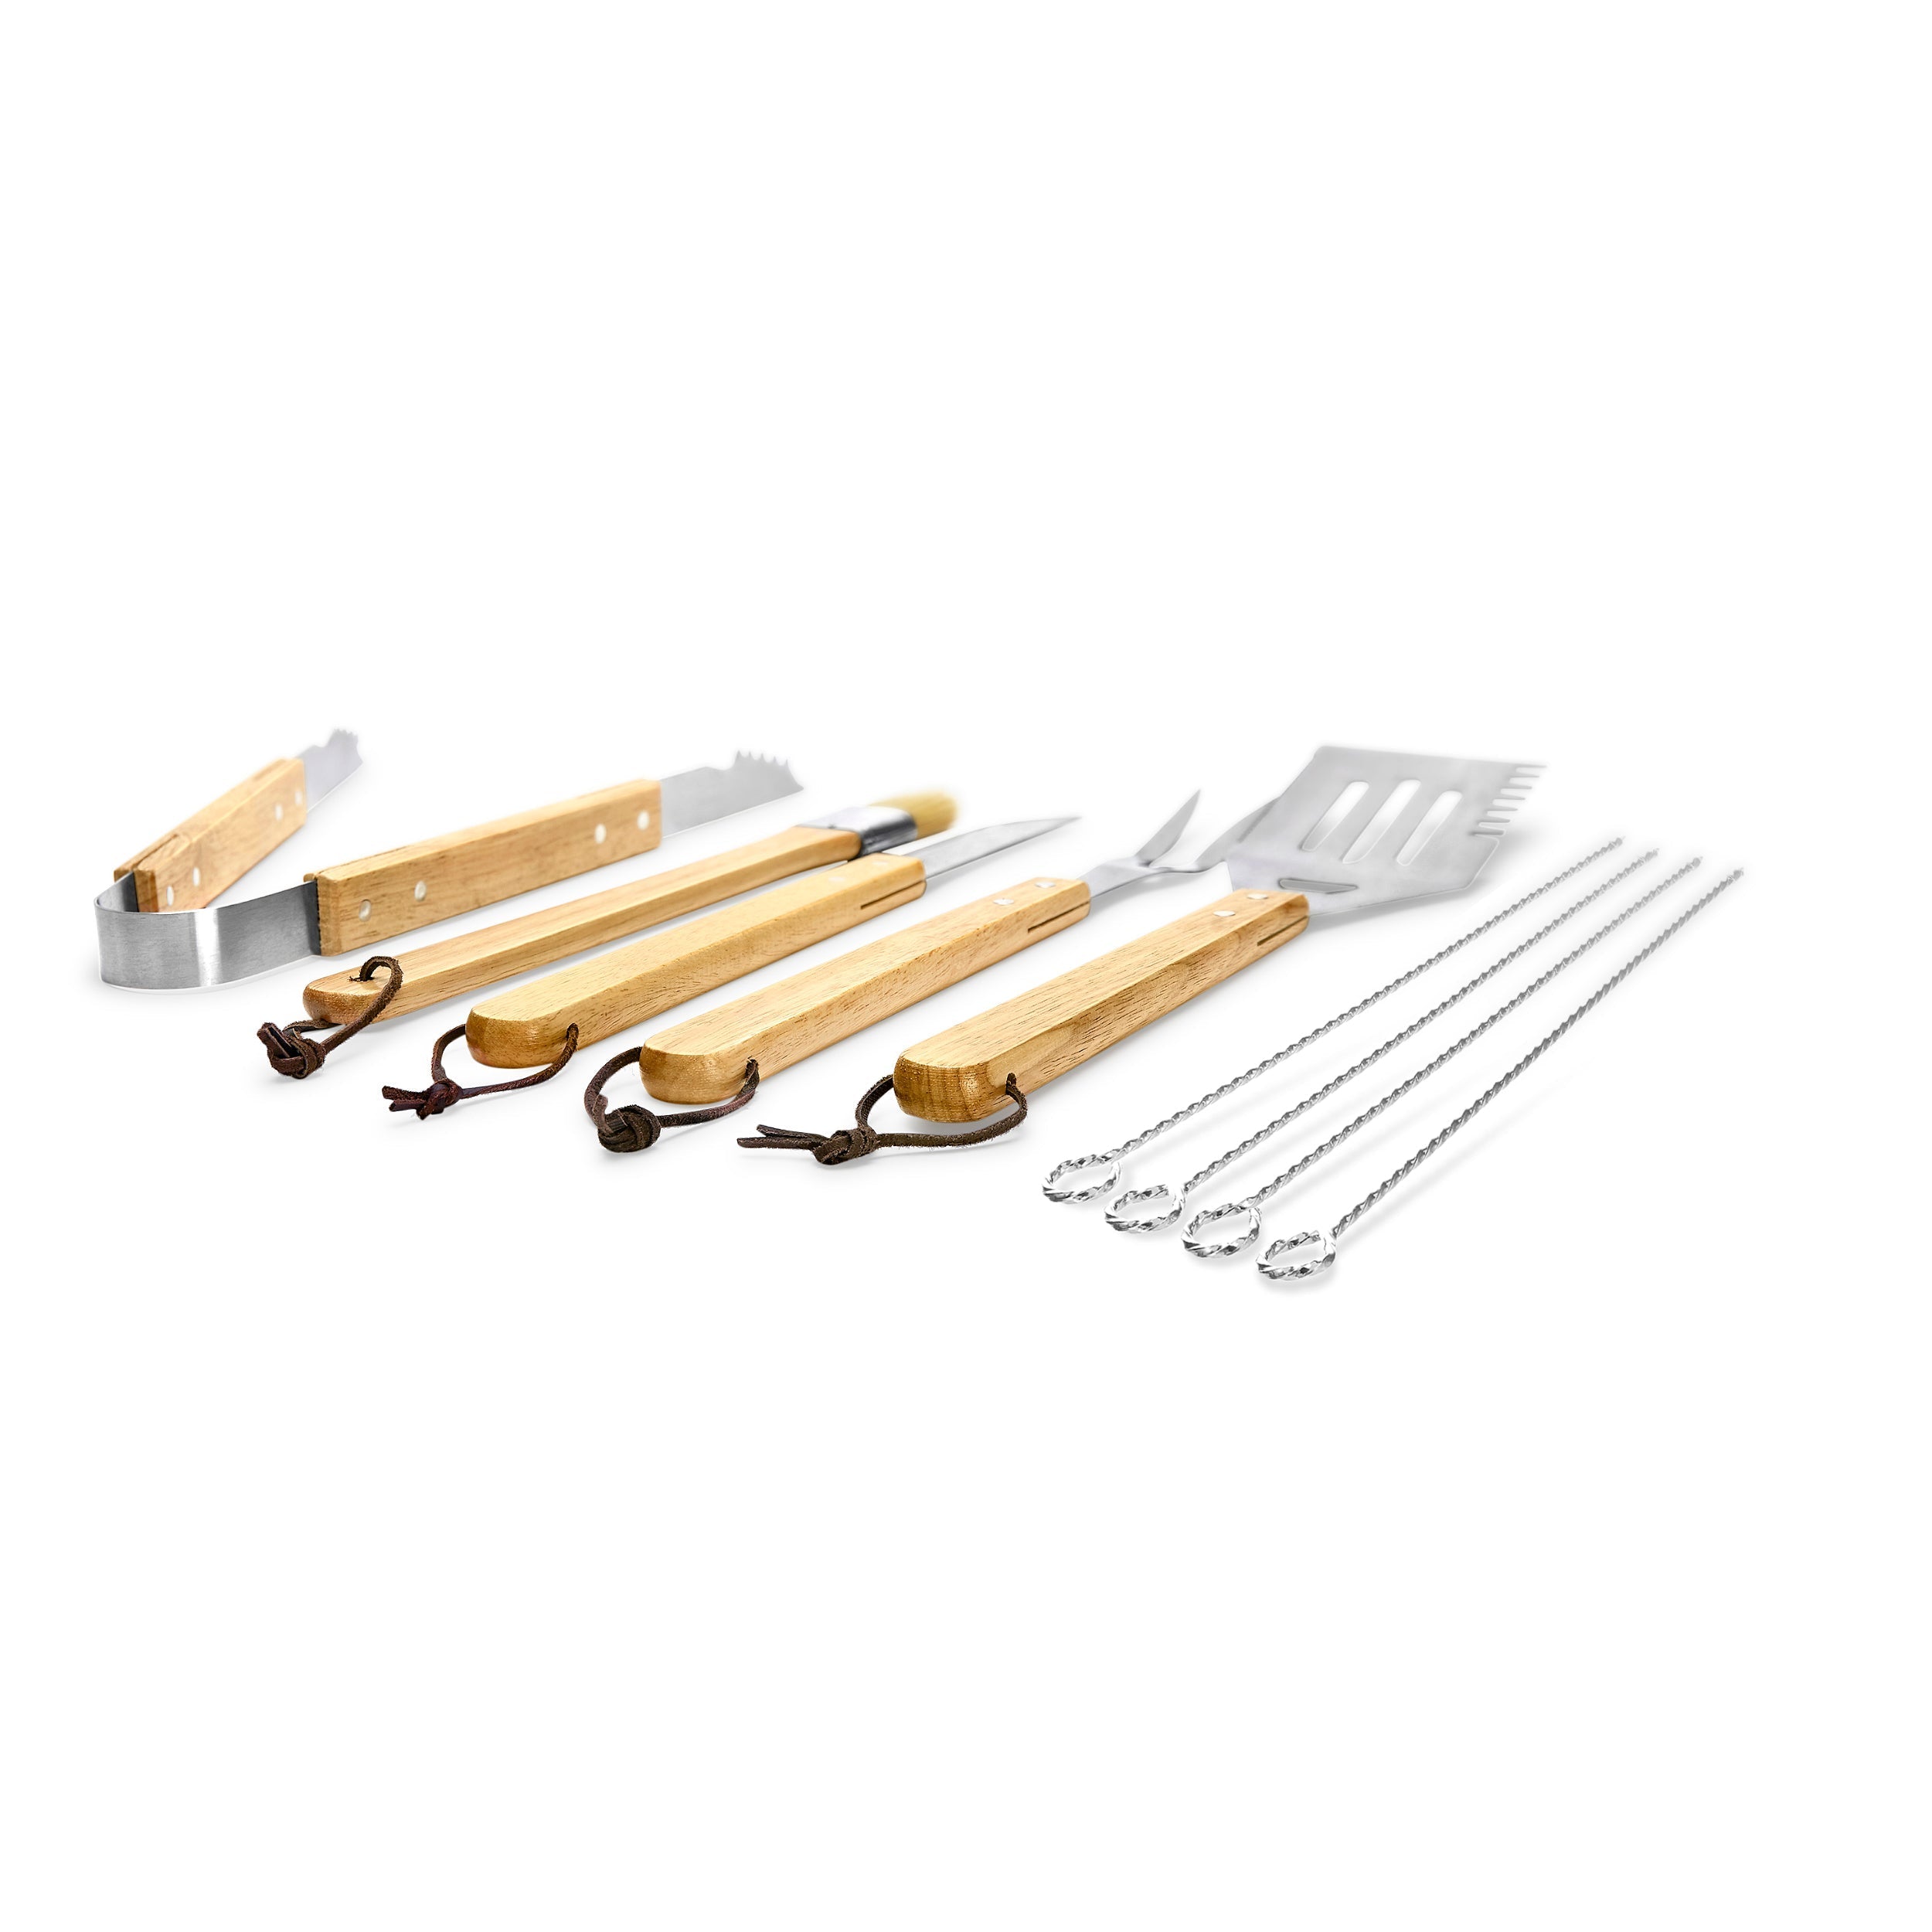 11 Piece BBQ Grill Set - King of the Grill